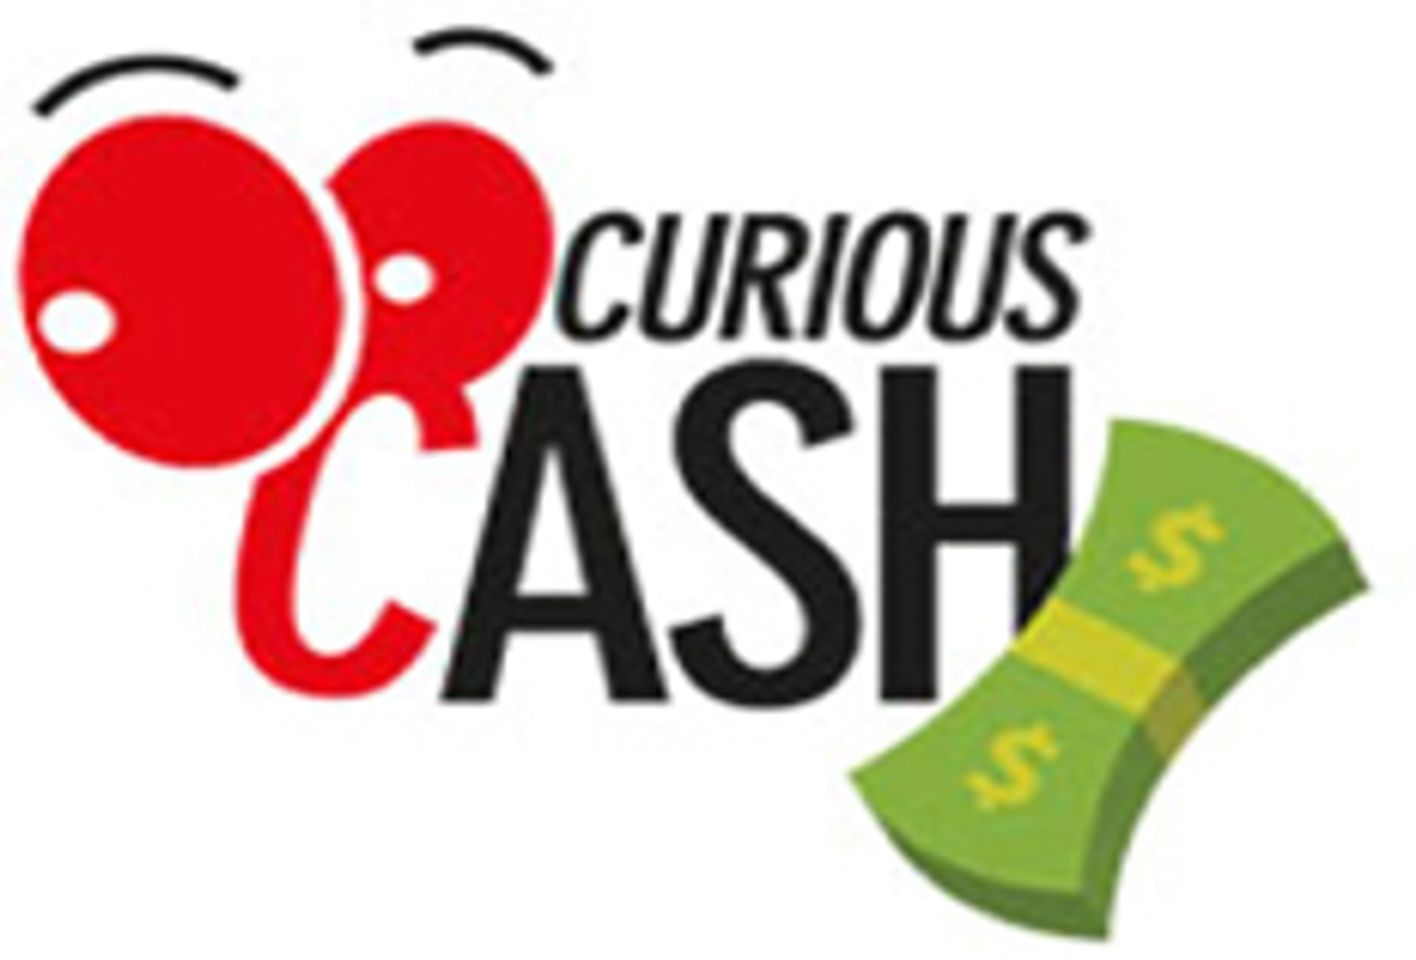 Cybersocket Nominates CuriousCash for Best Affiliate Program